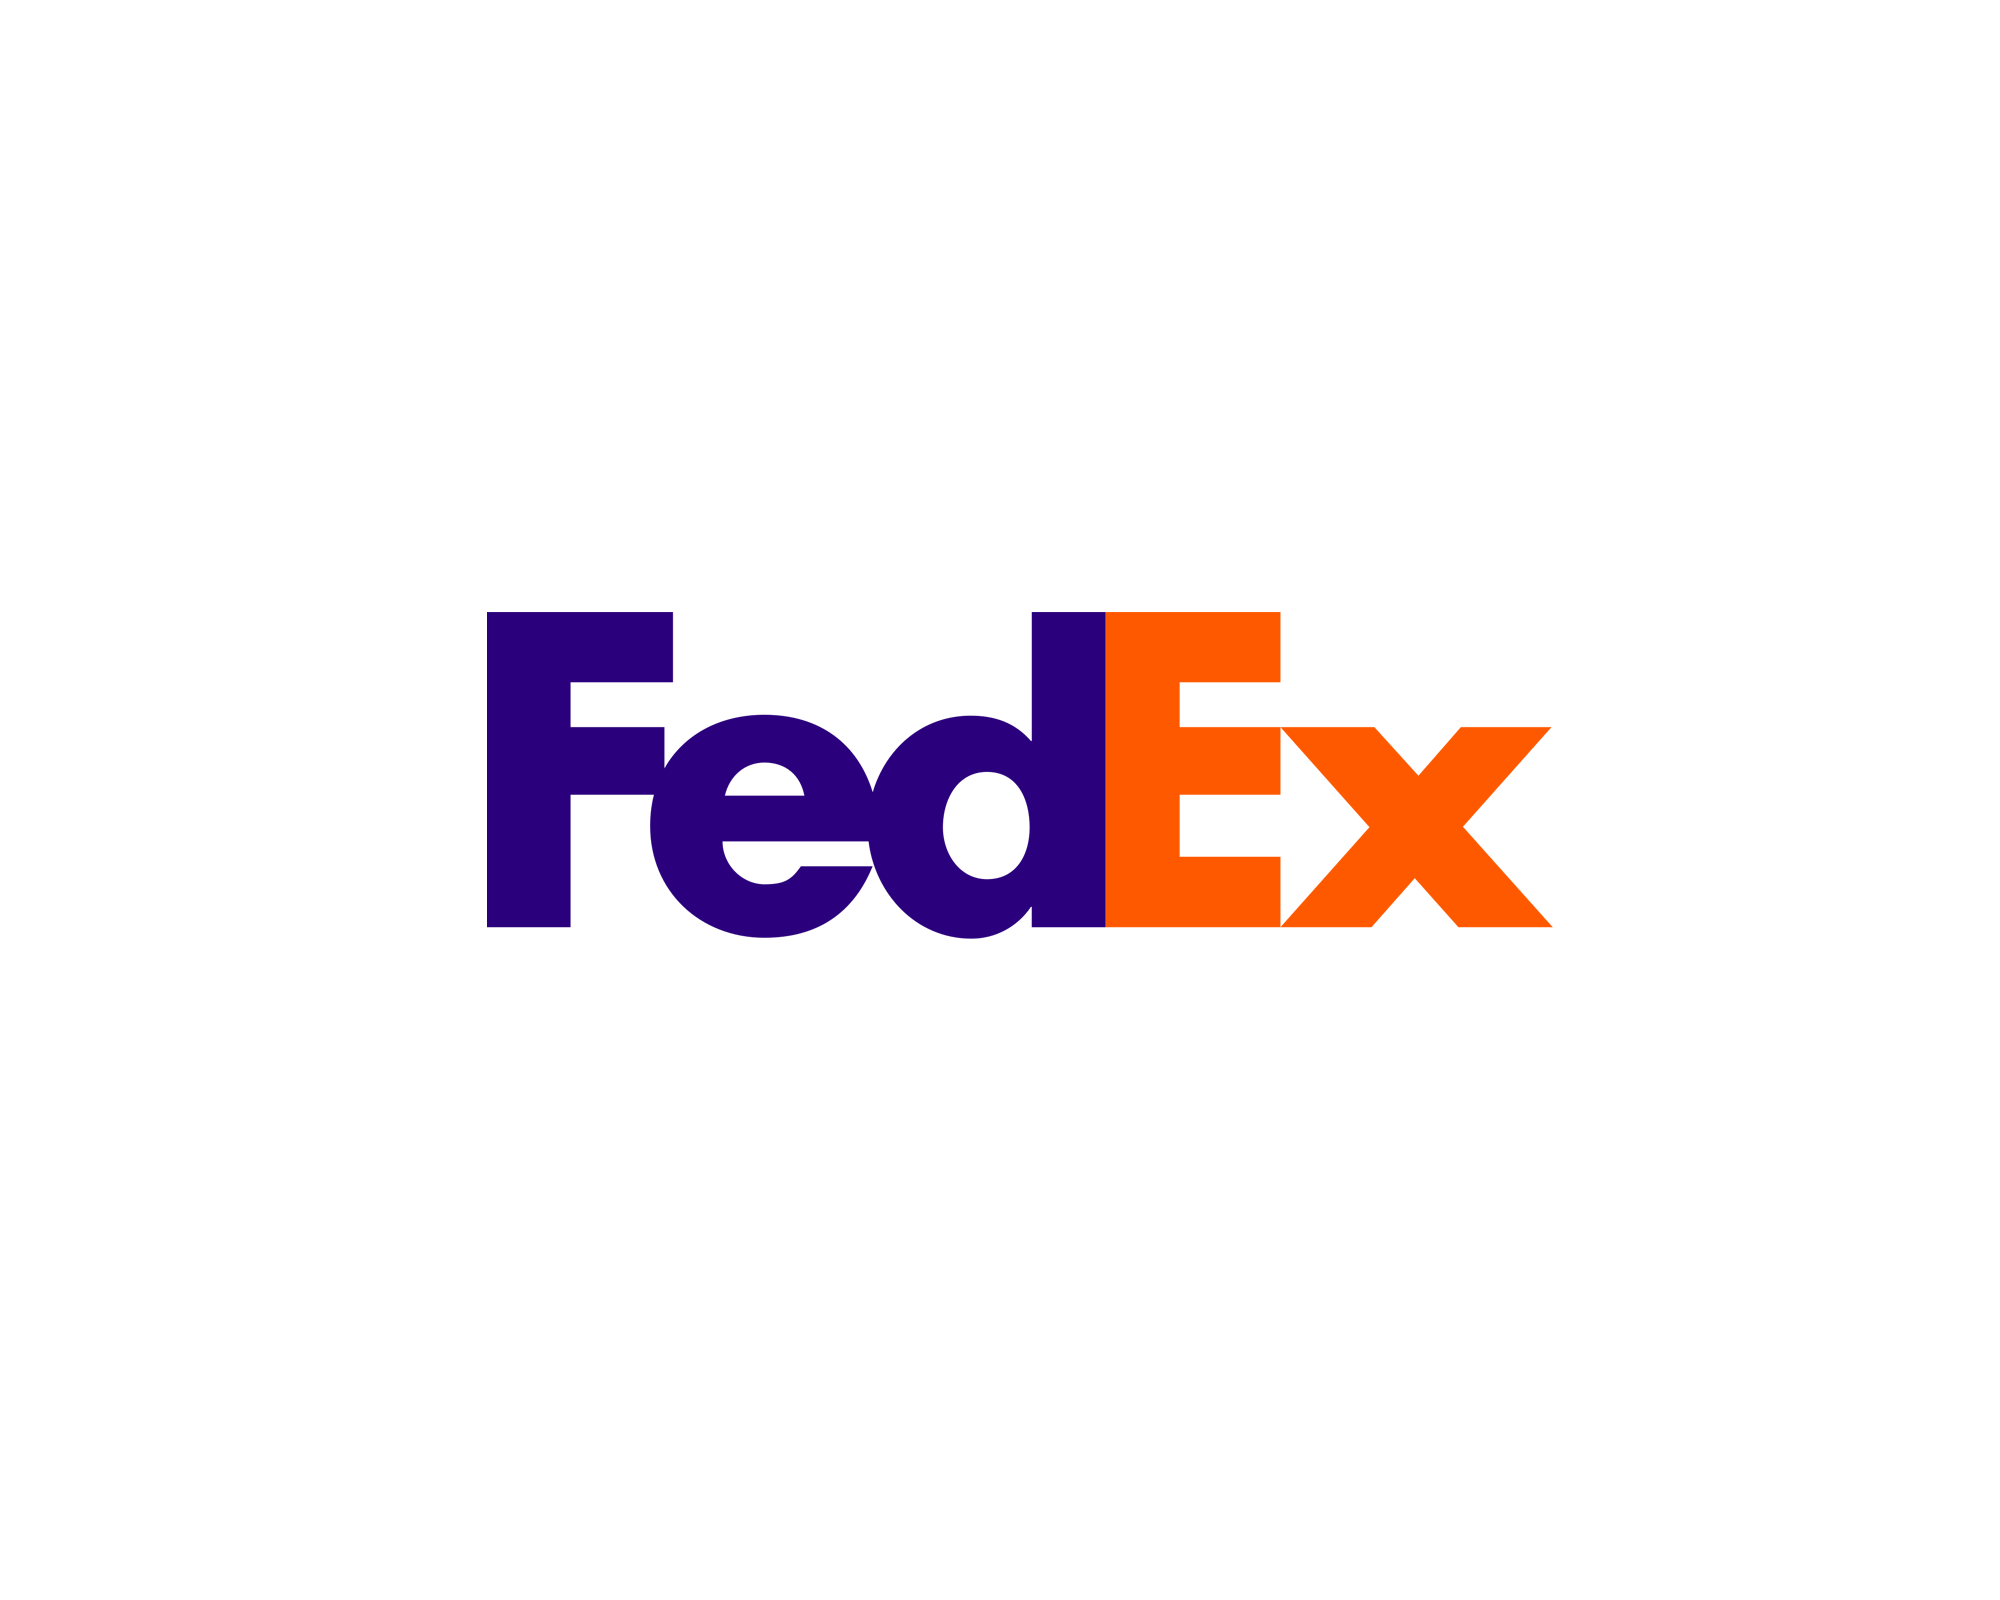 FedEx Corp. acquires TNT Expr